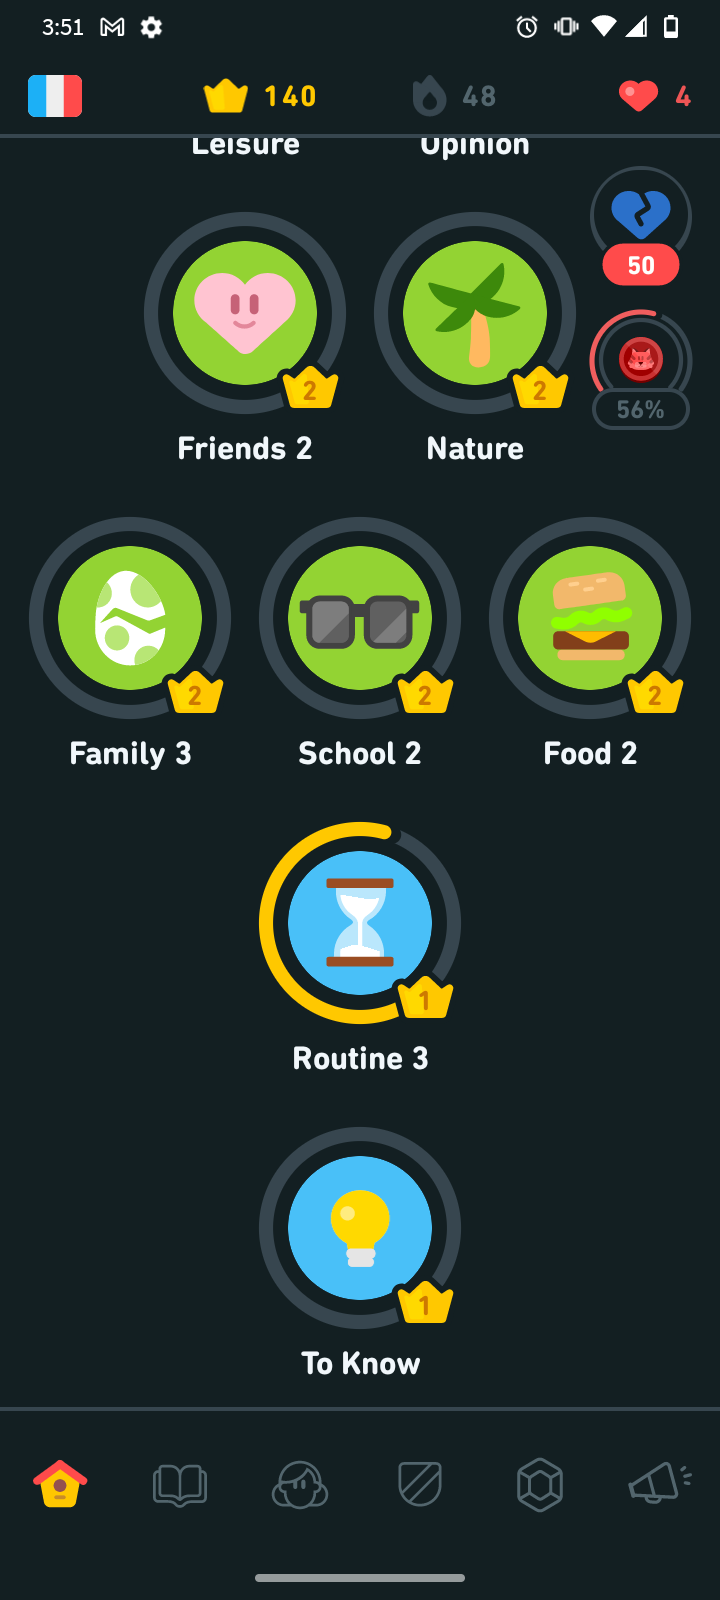 A Duolingo language skill tree showing skills in progress and various crown levels.